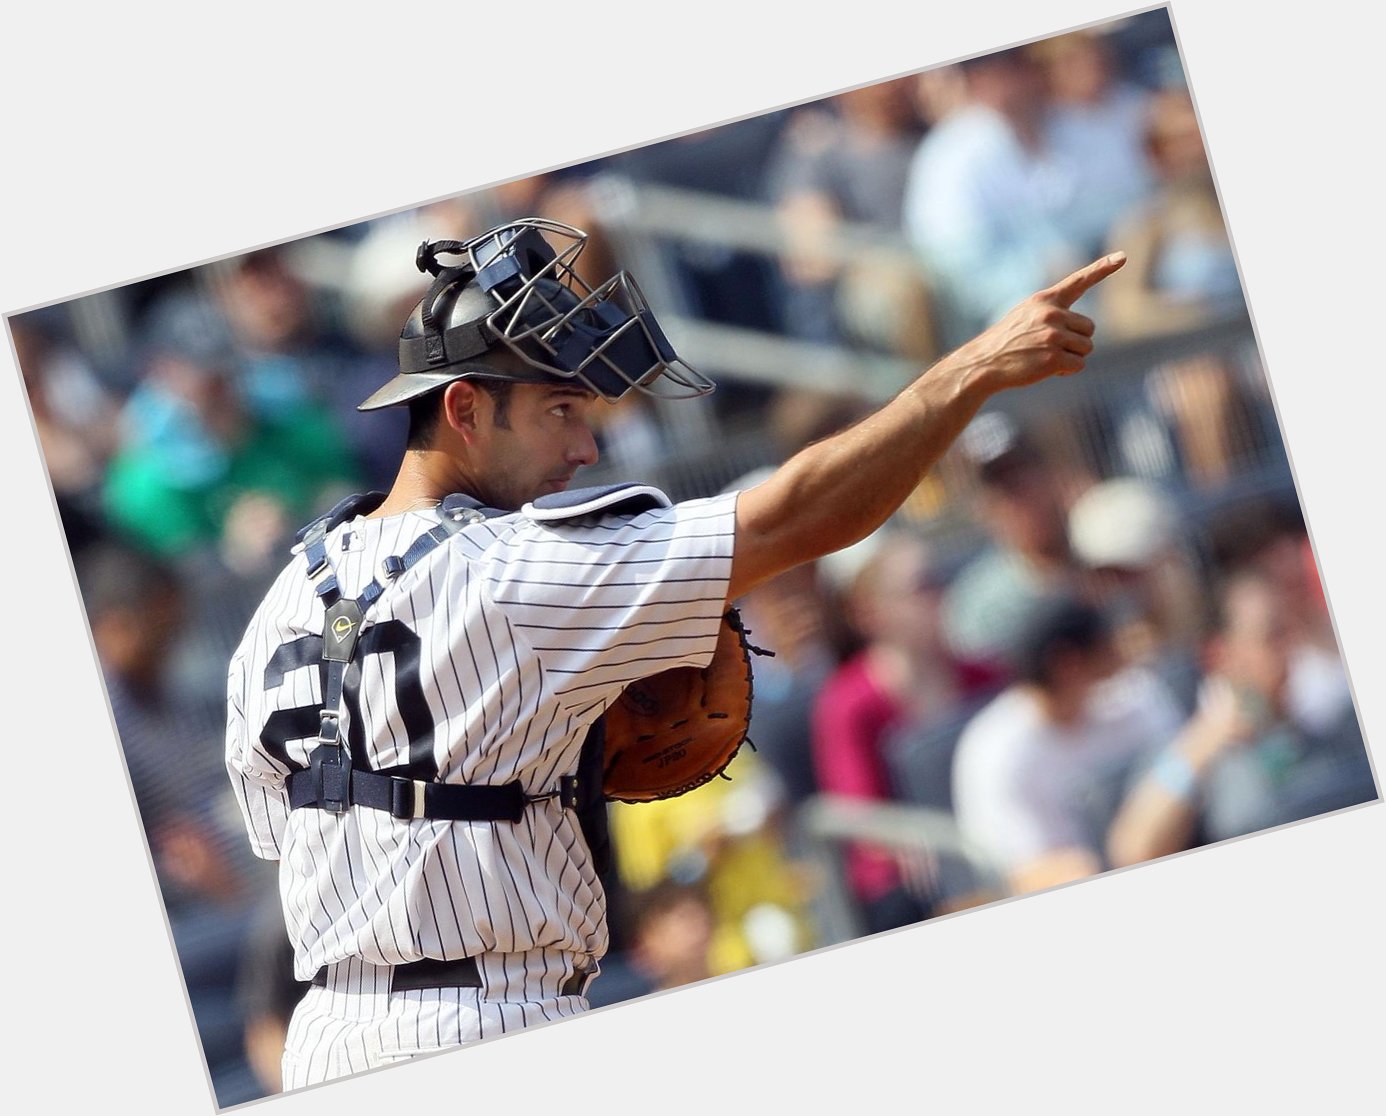 Happy Birthday to Jorge Posada. 

The 2022 could use him to kick all their asses out of this slump. 